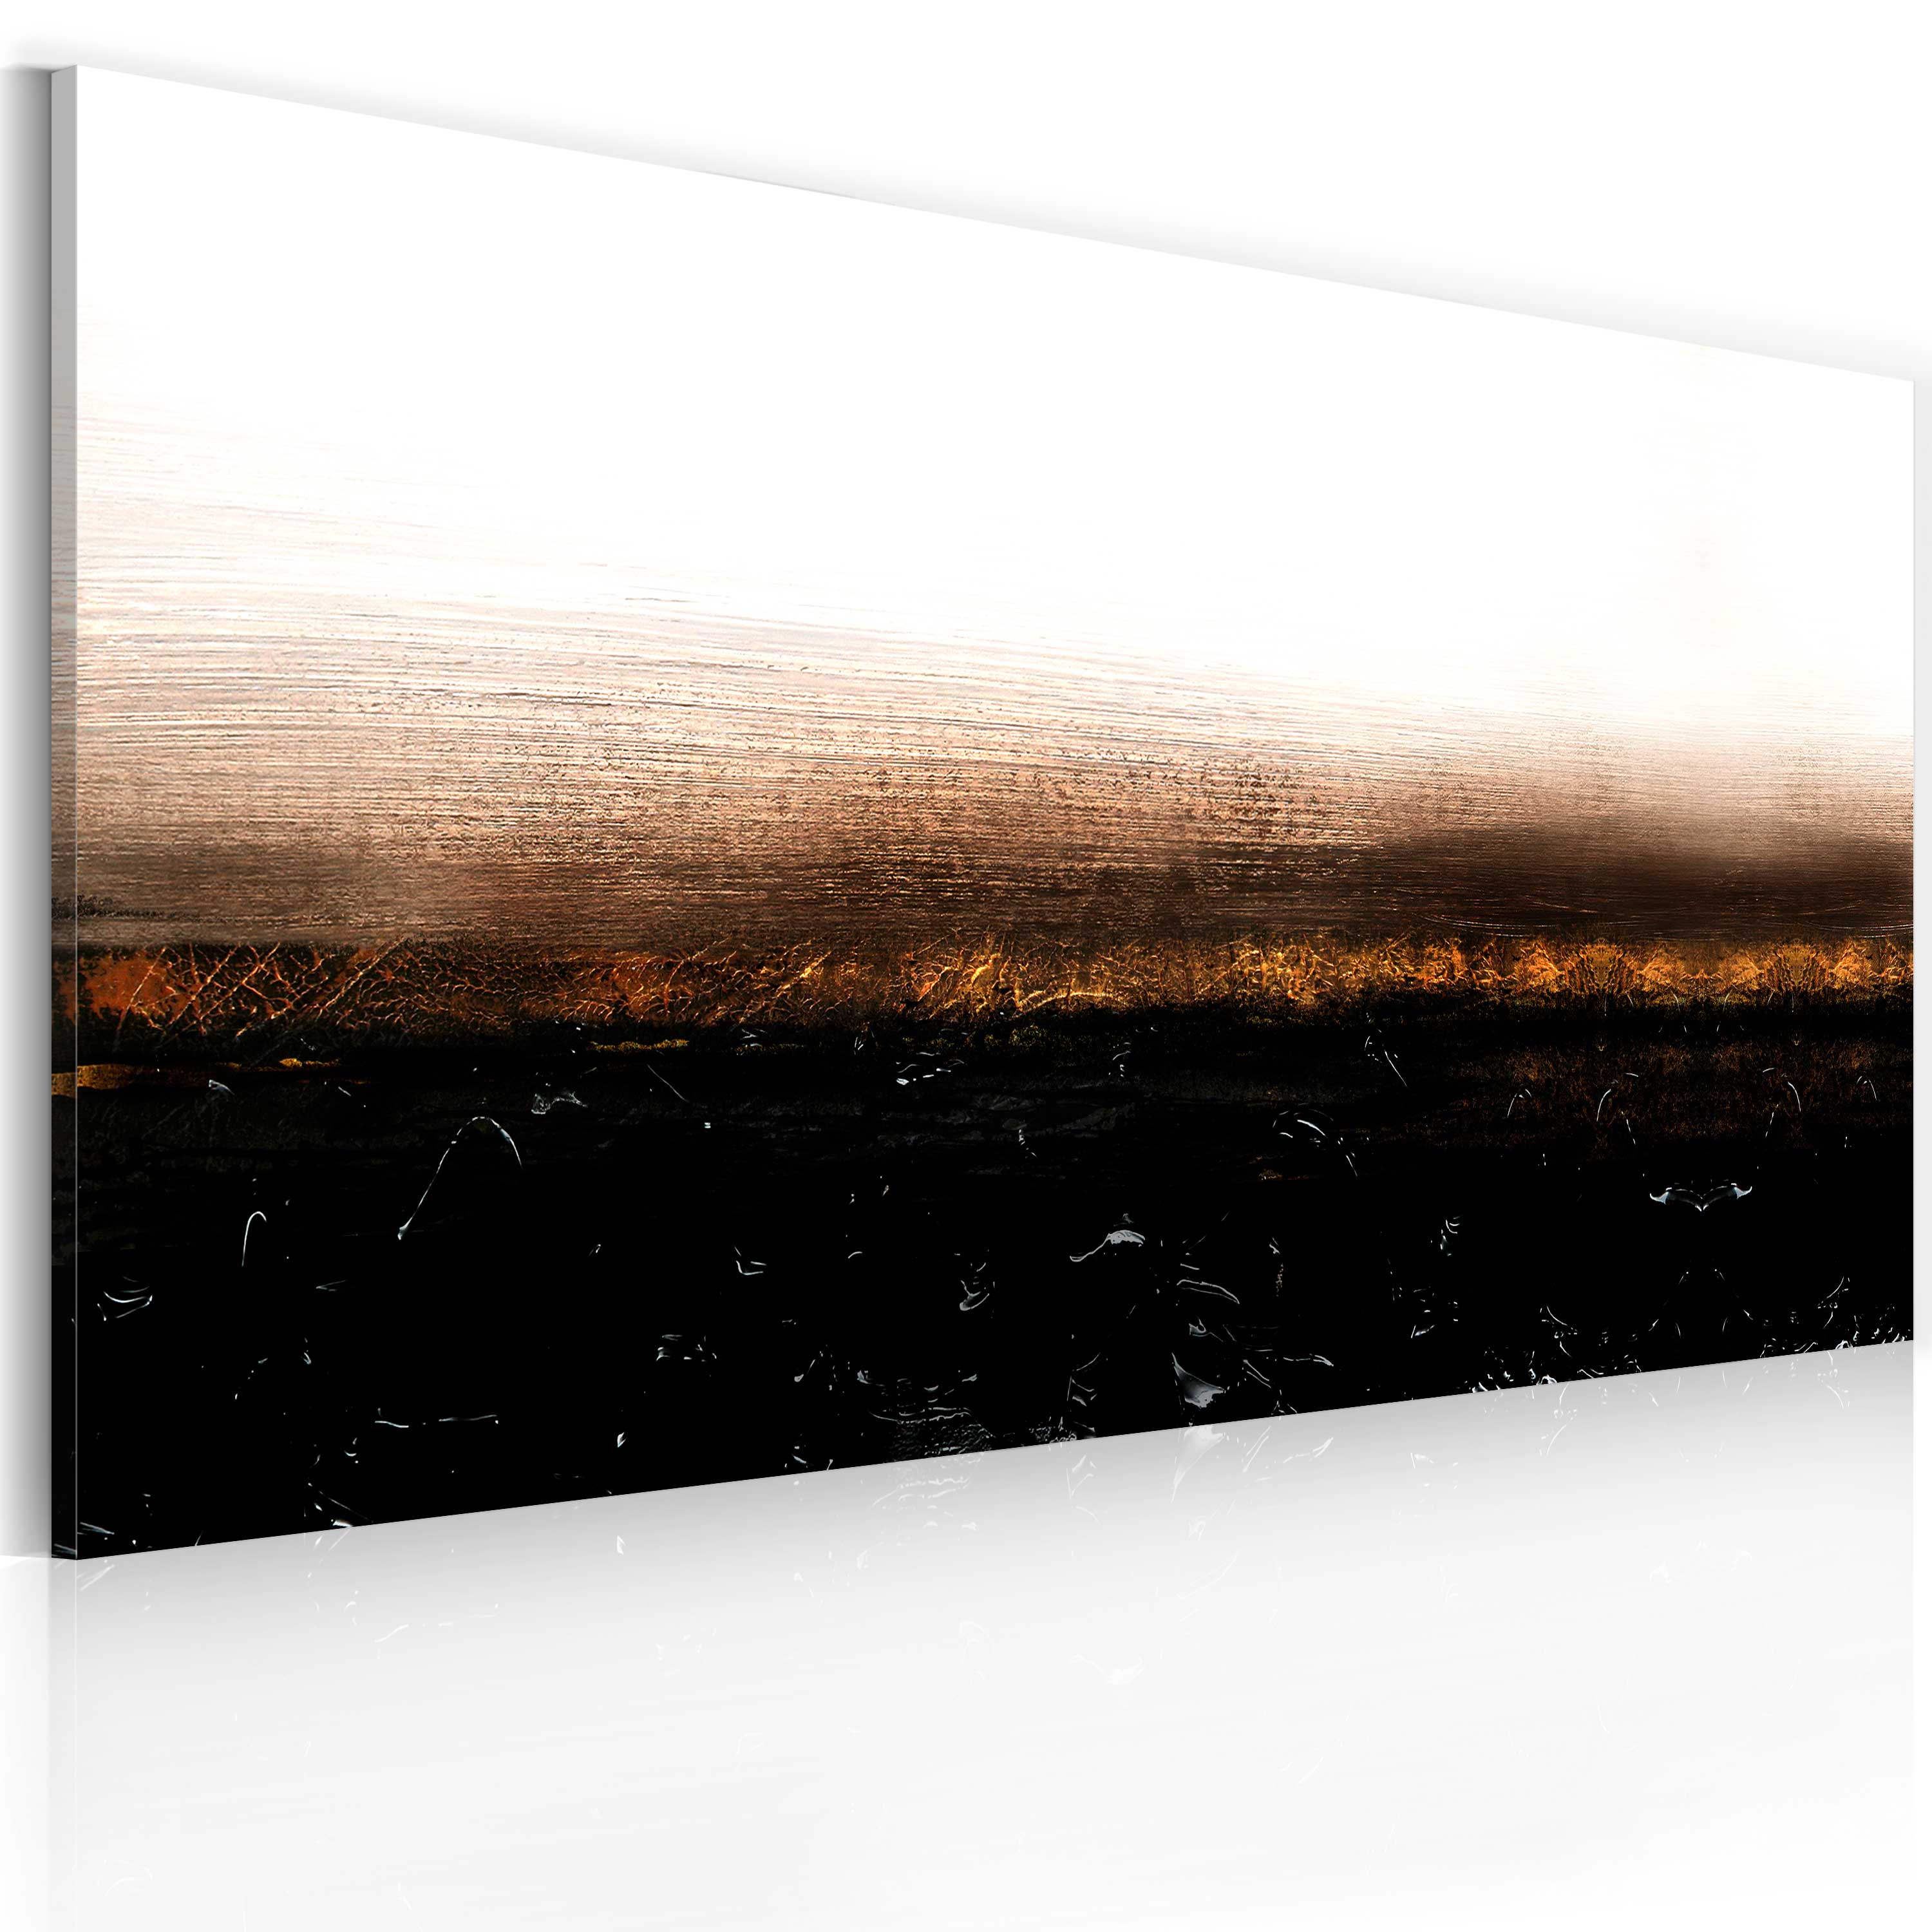 Handmade painting - Black soil (Abstraction) - 120x60